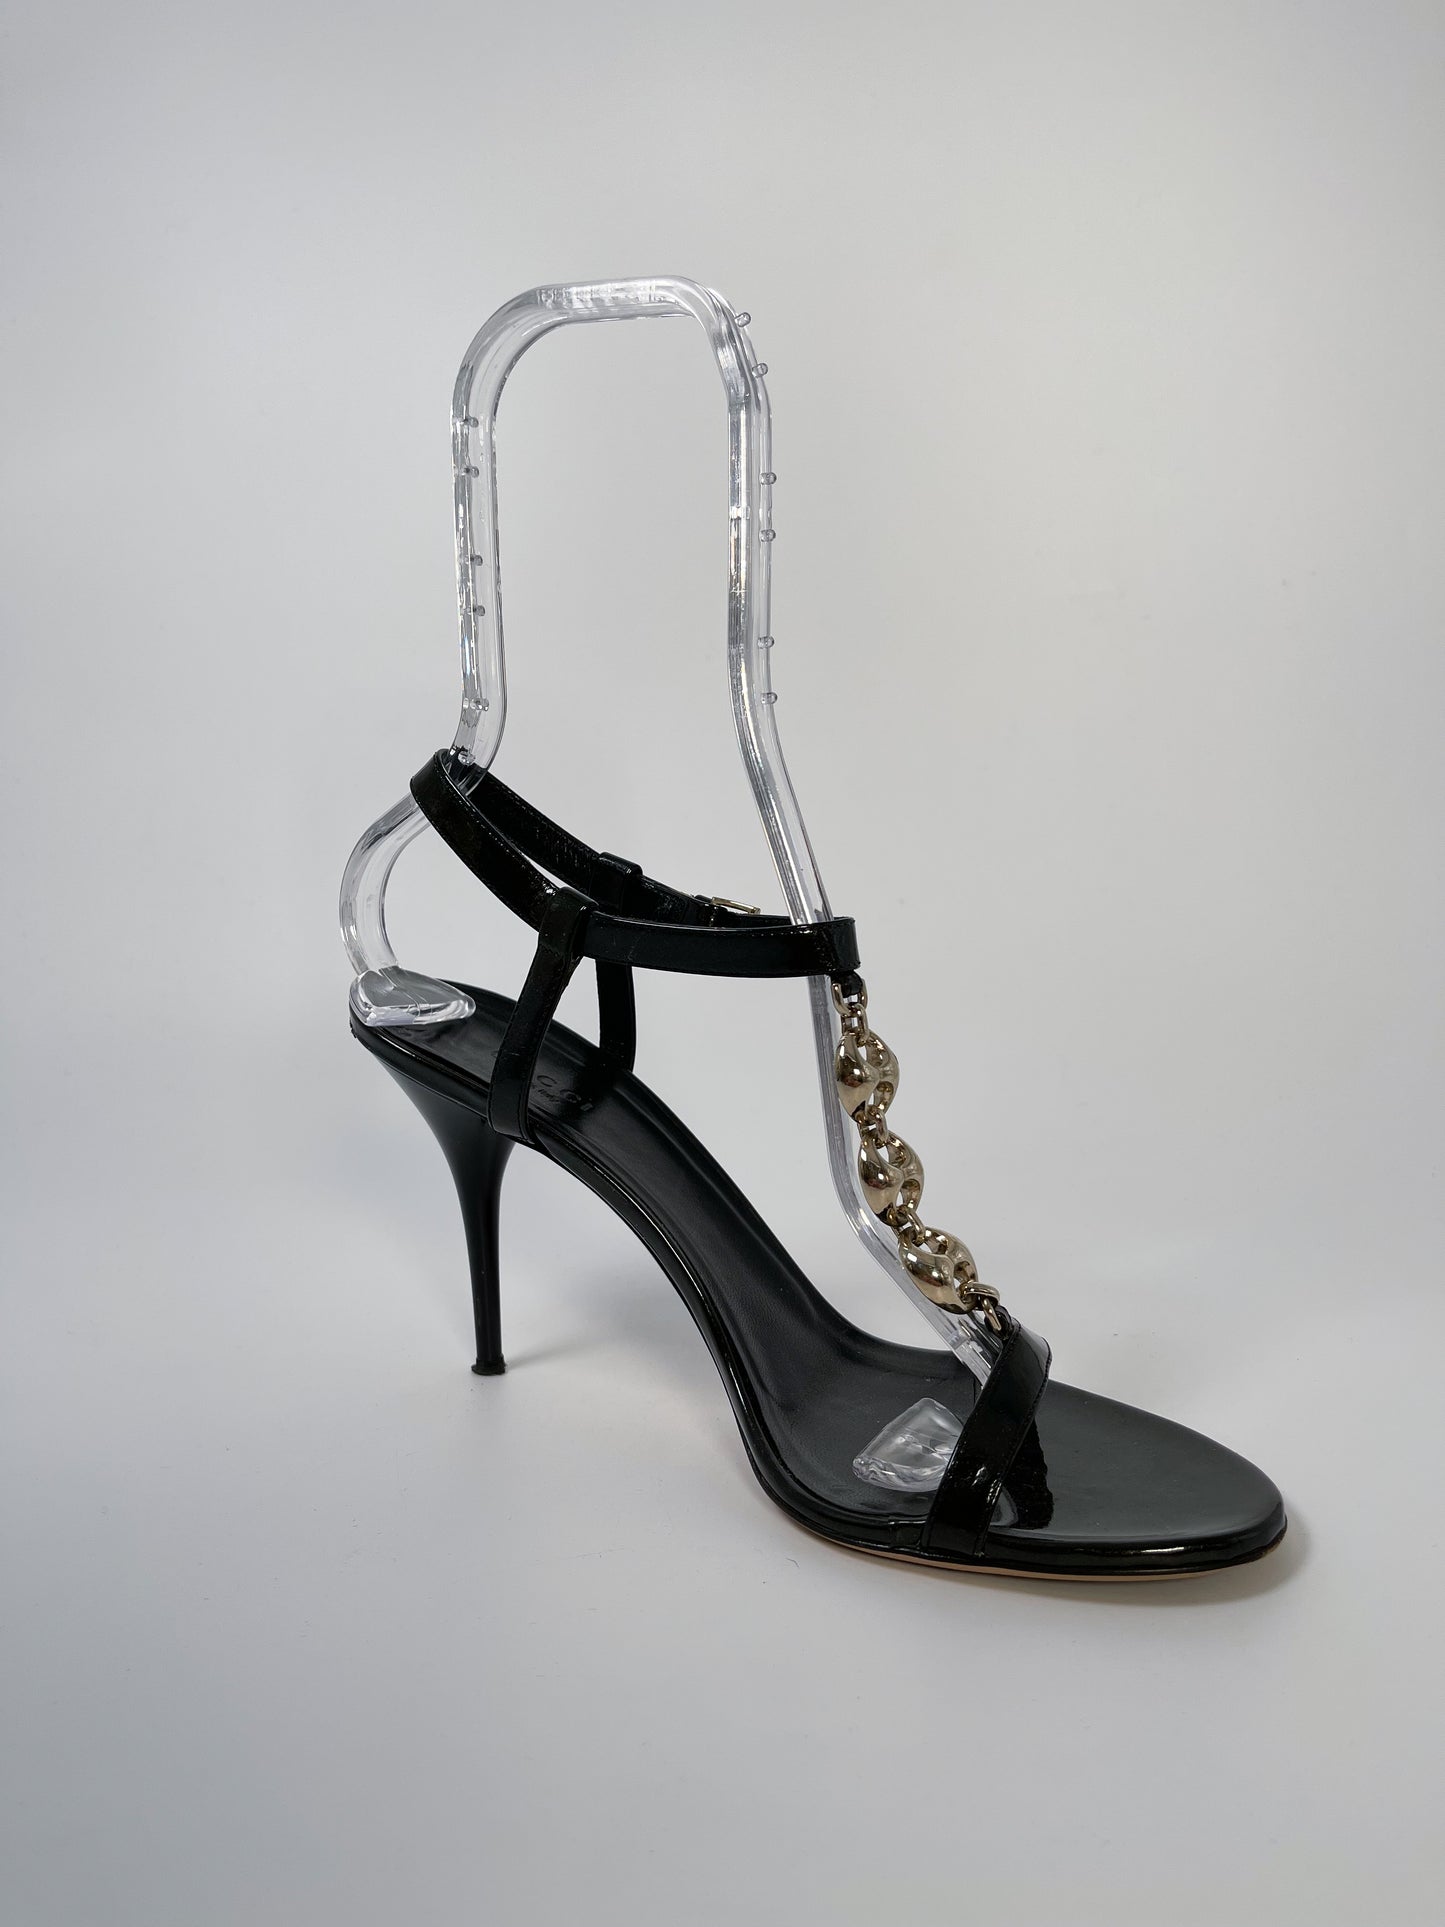 Gucci Patent Leather Chain-Link T-Strap Sandals (Size 8)